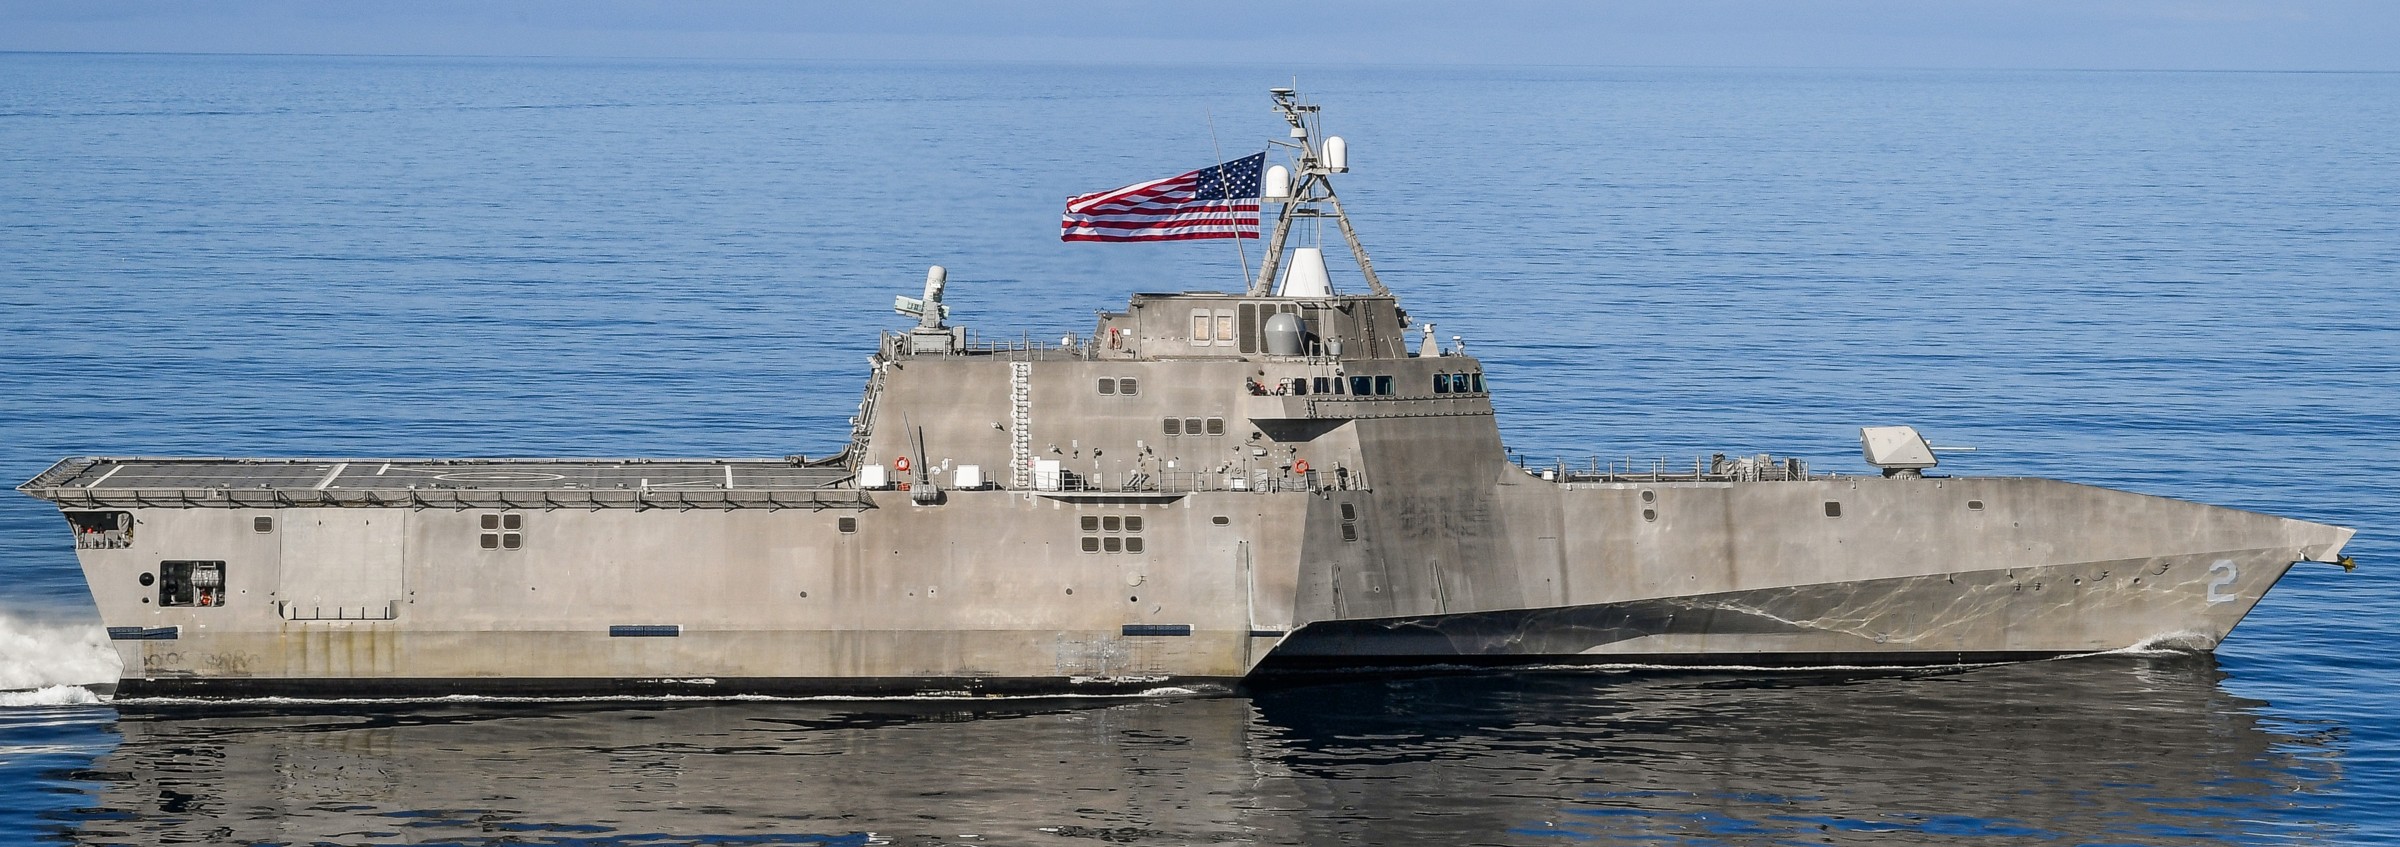 lcs-2 uss independence littoral combat ship us navy class 17